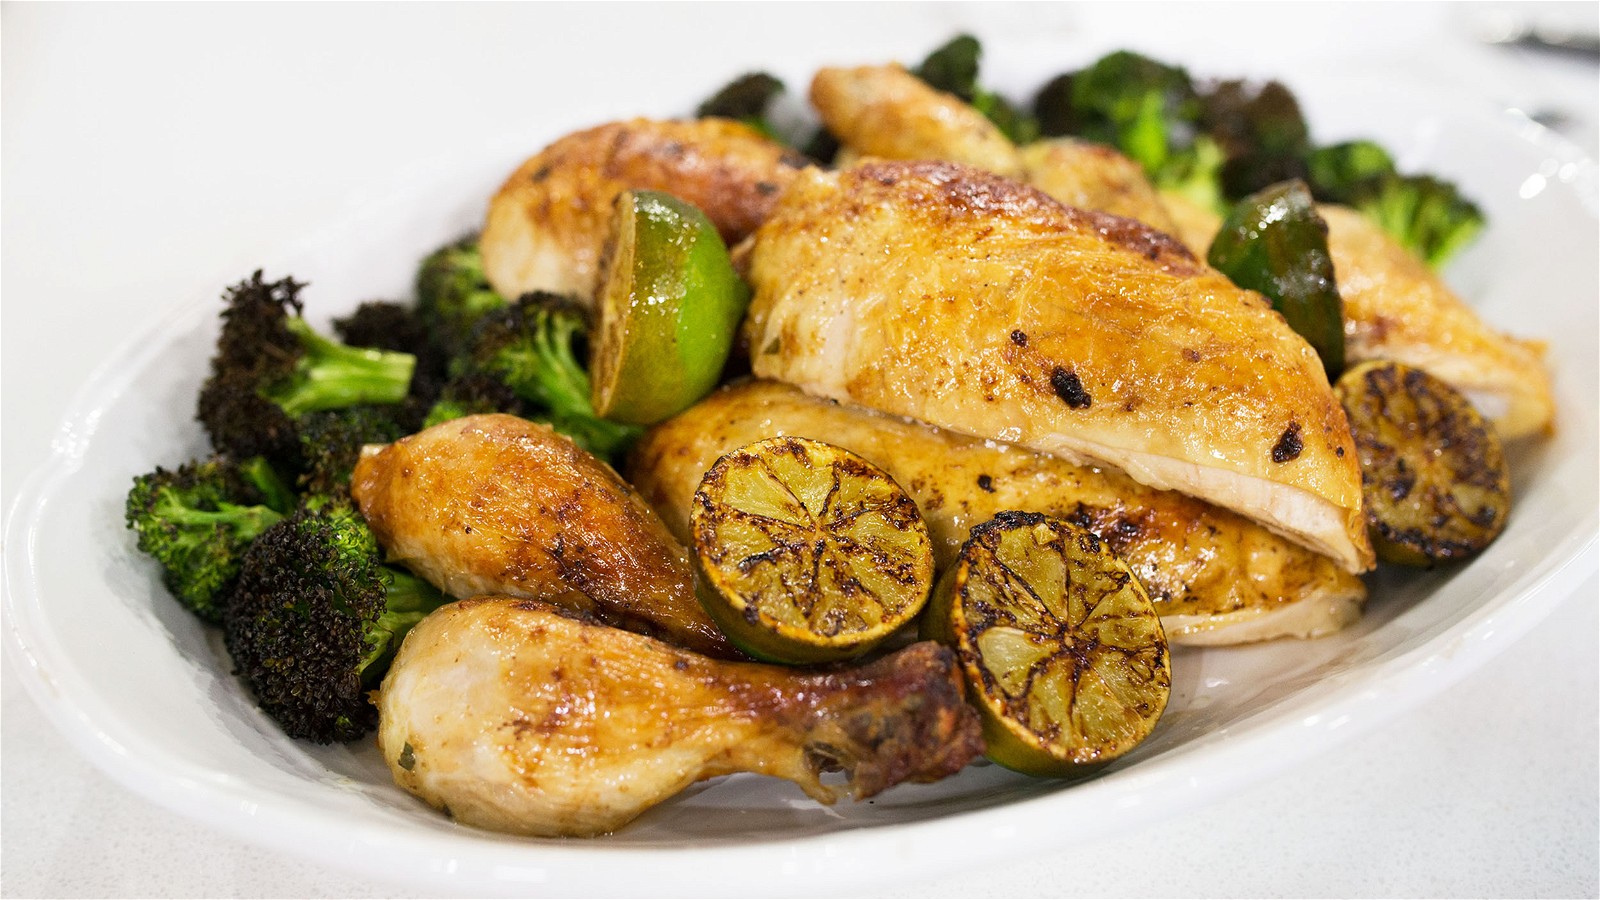 Image of Broccoli in Roast Chicken Drippings